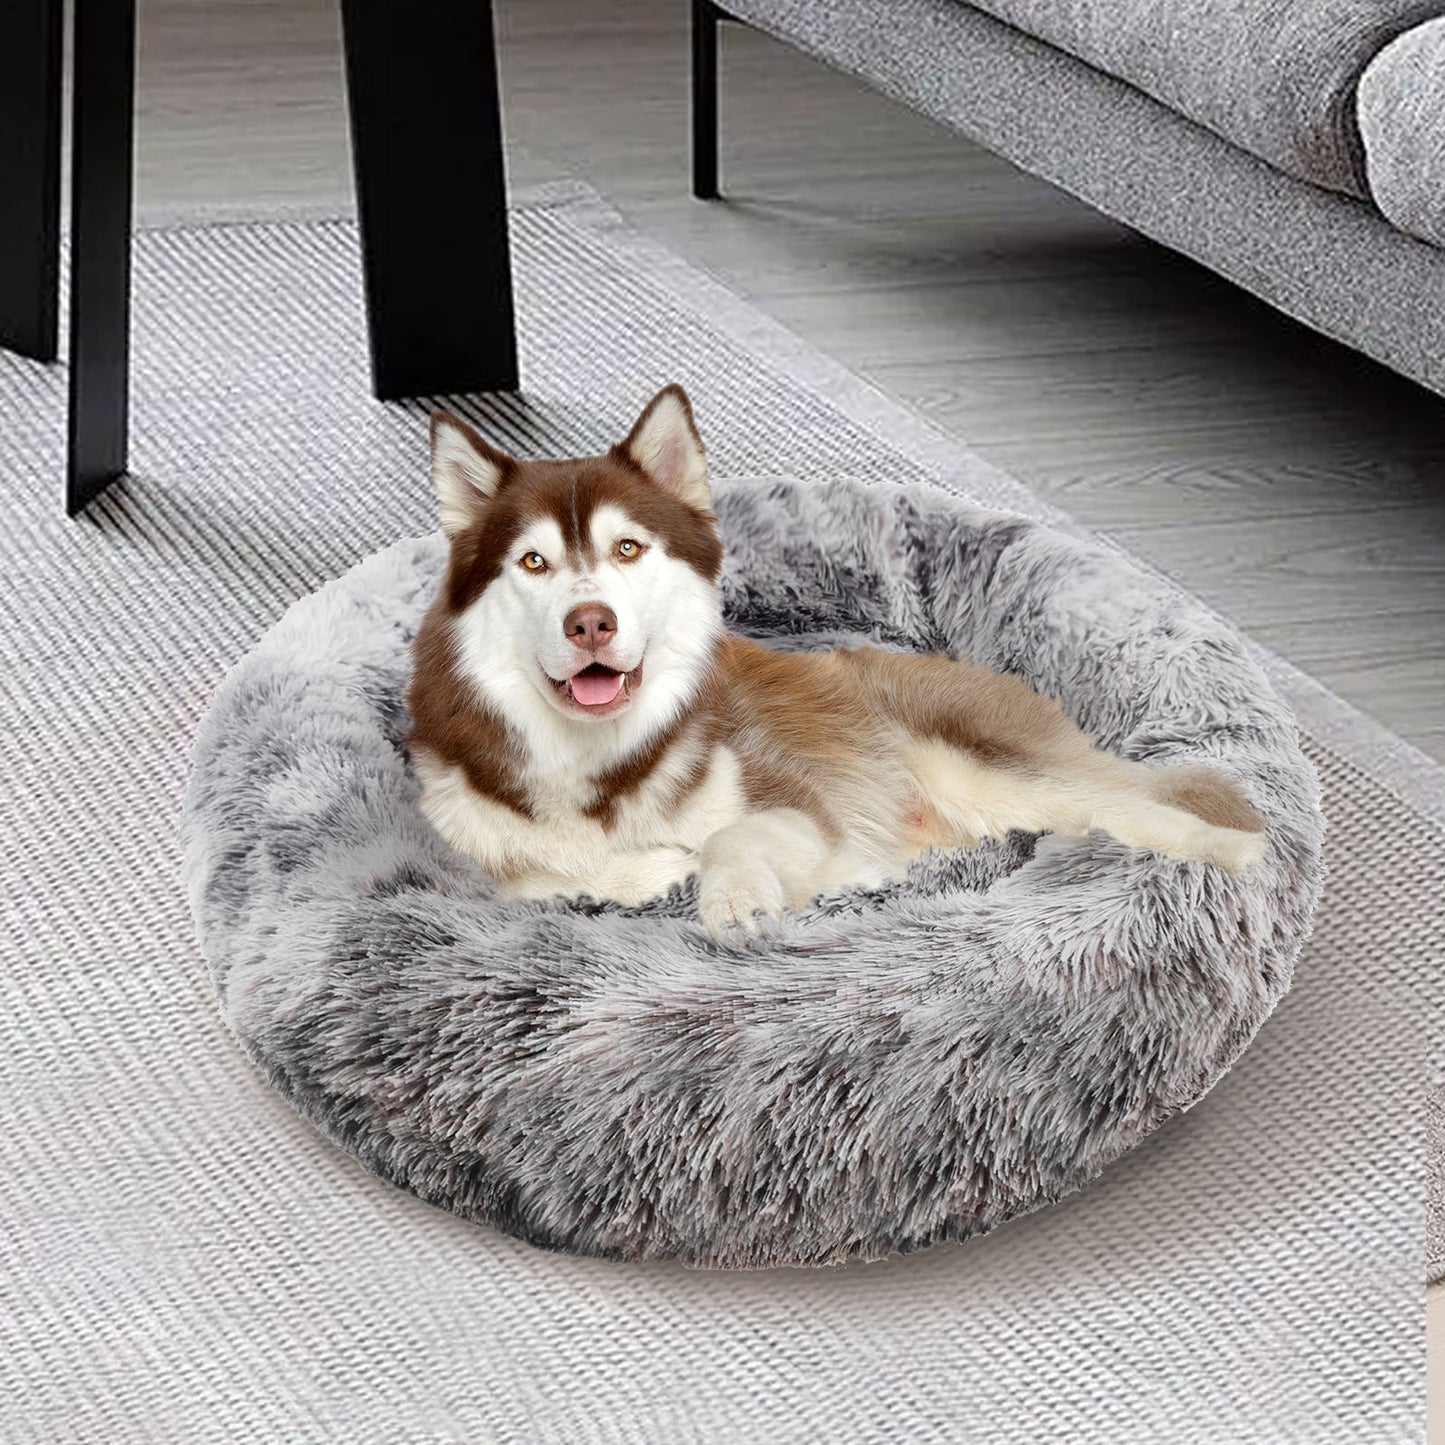 Pawfriends Pet Bed Dog Cat Calming Bed Sleeping Comfy Cave Washable Mat Extra Large 100cm